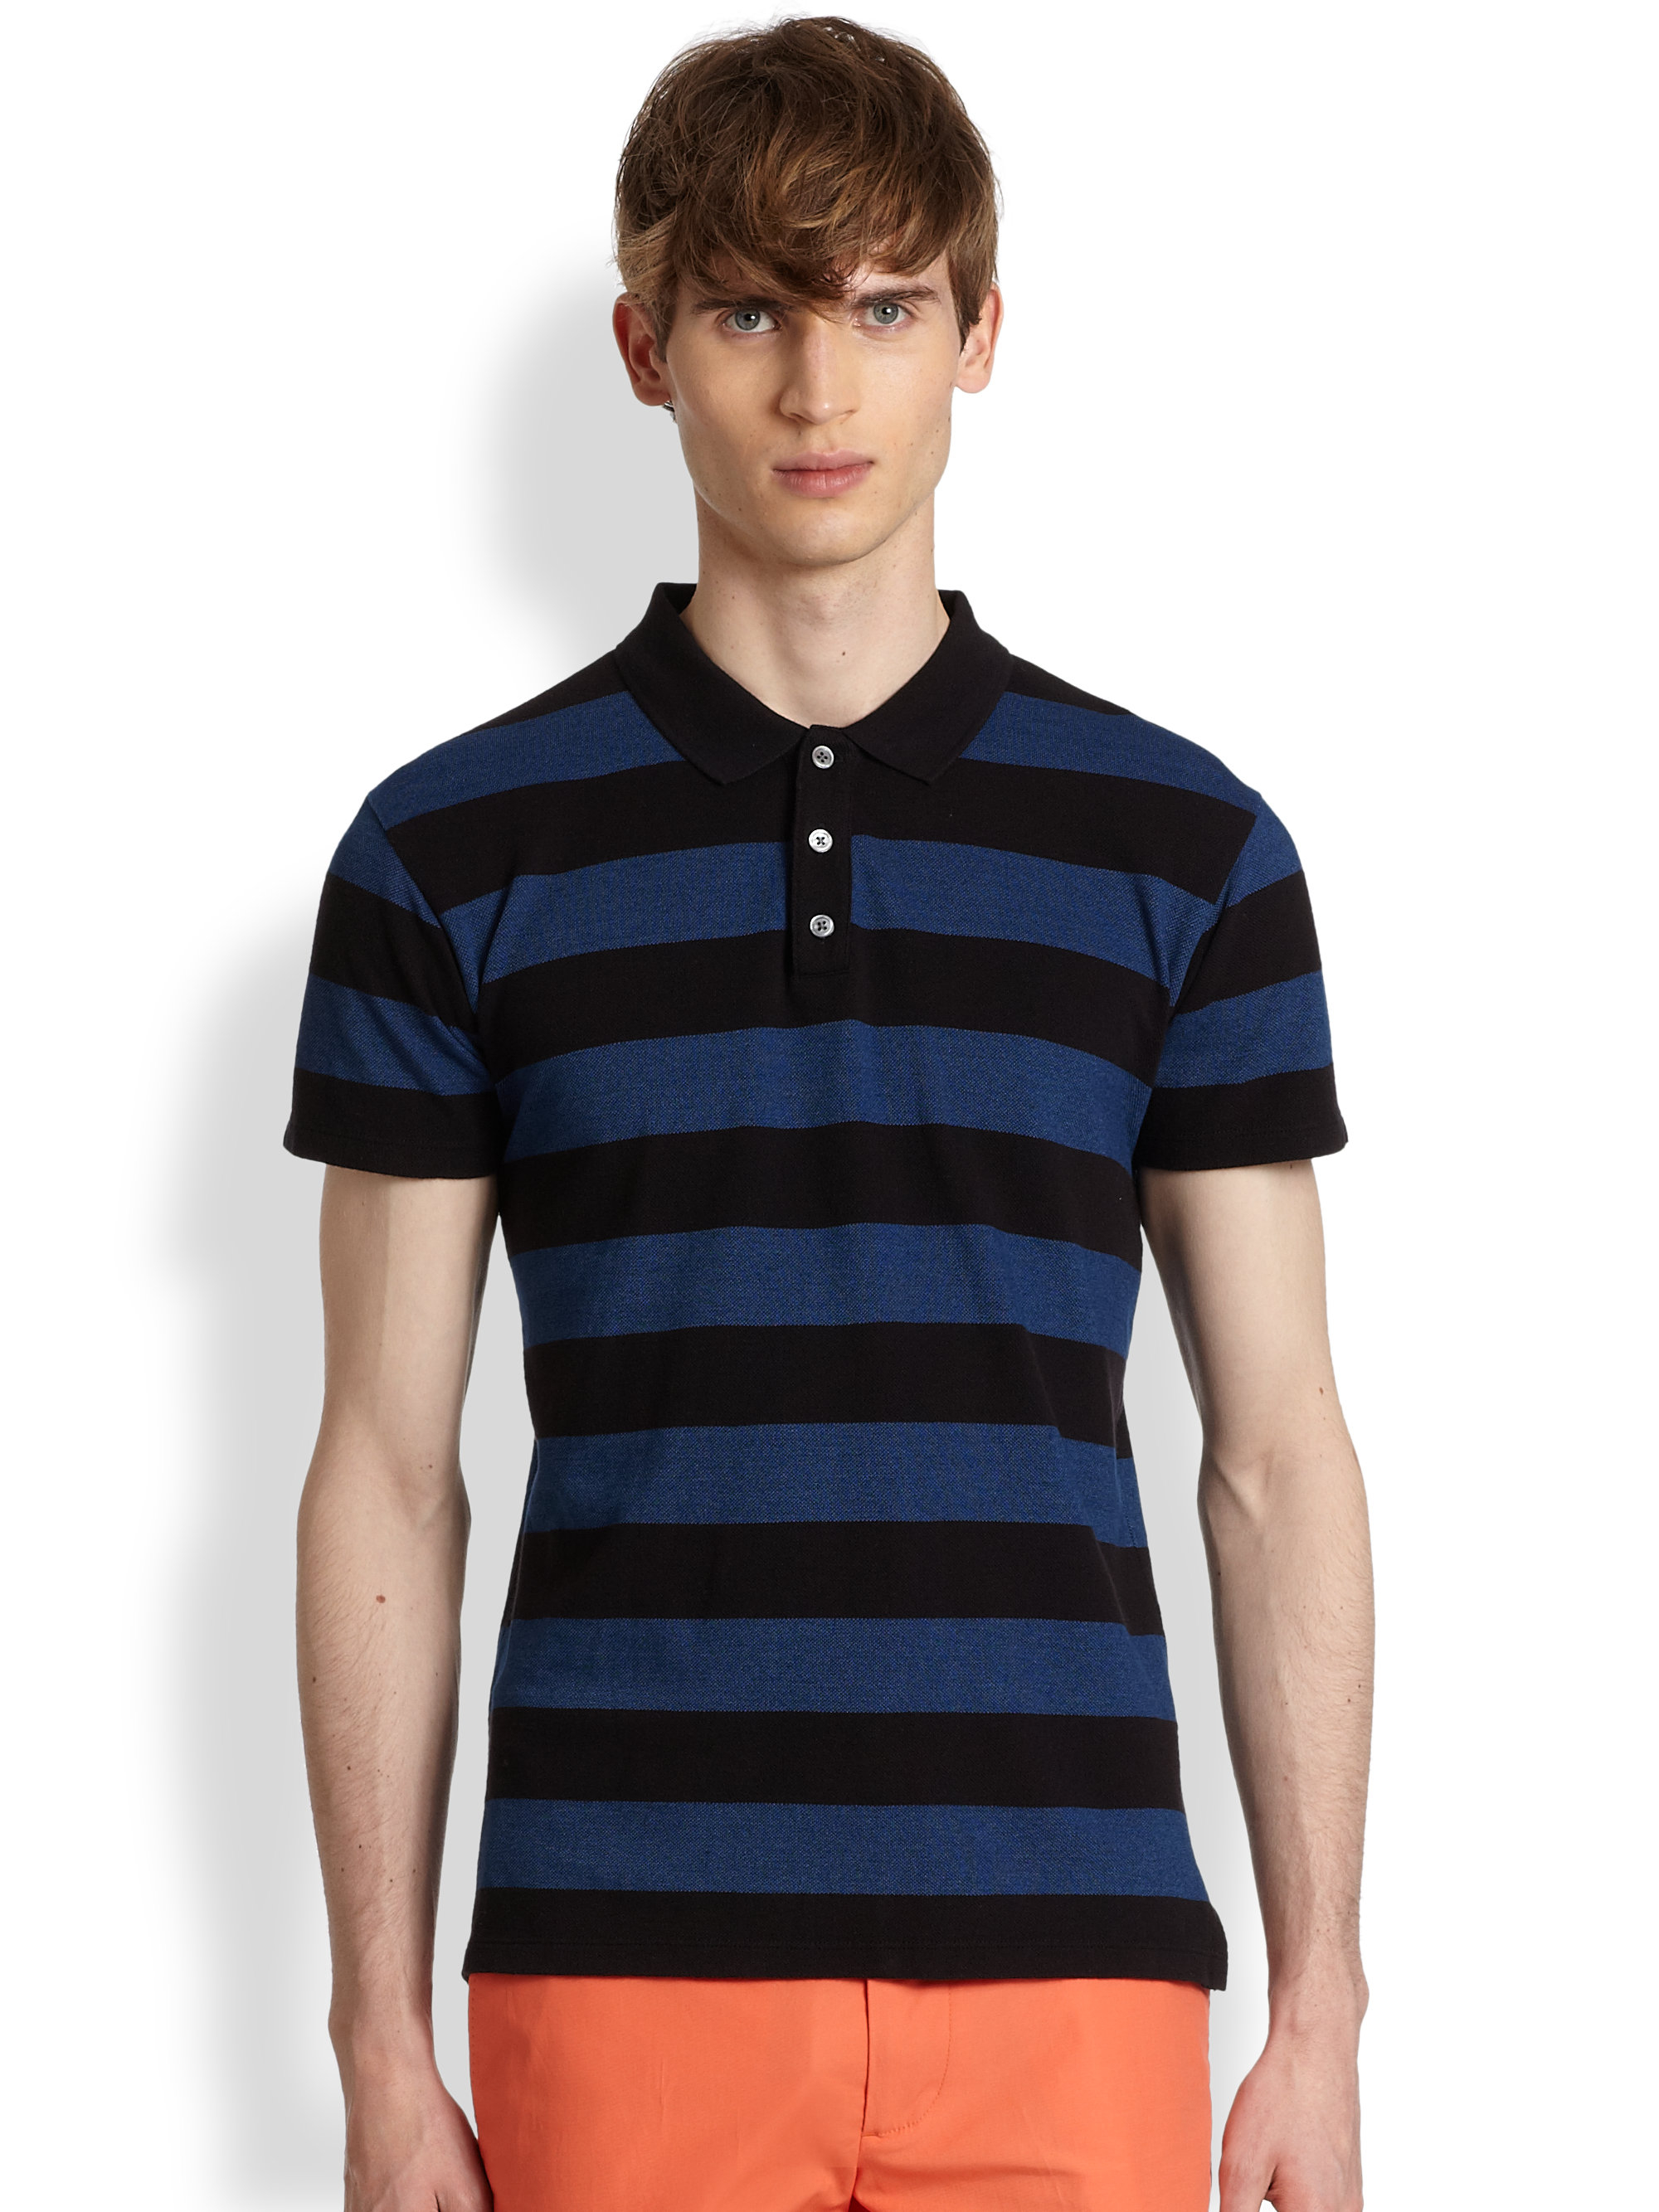 Lyst - Marc By Marc Jacobs Alta Dena Striped Polo Shirt in Blue for Men